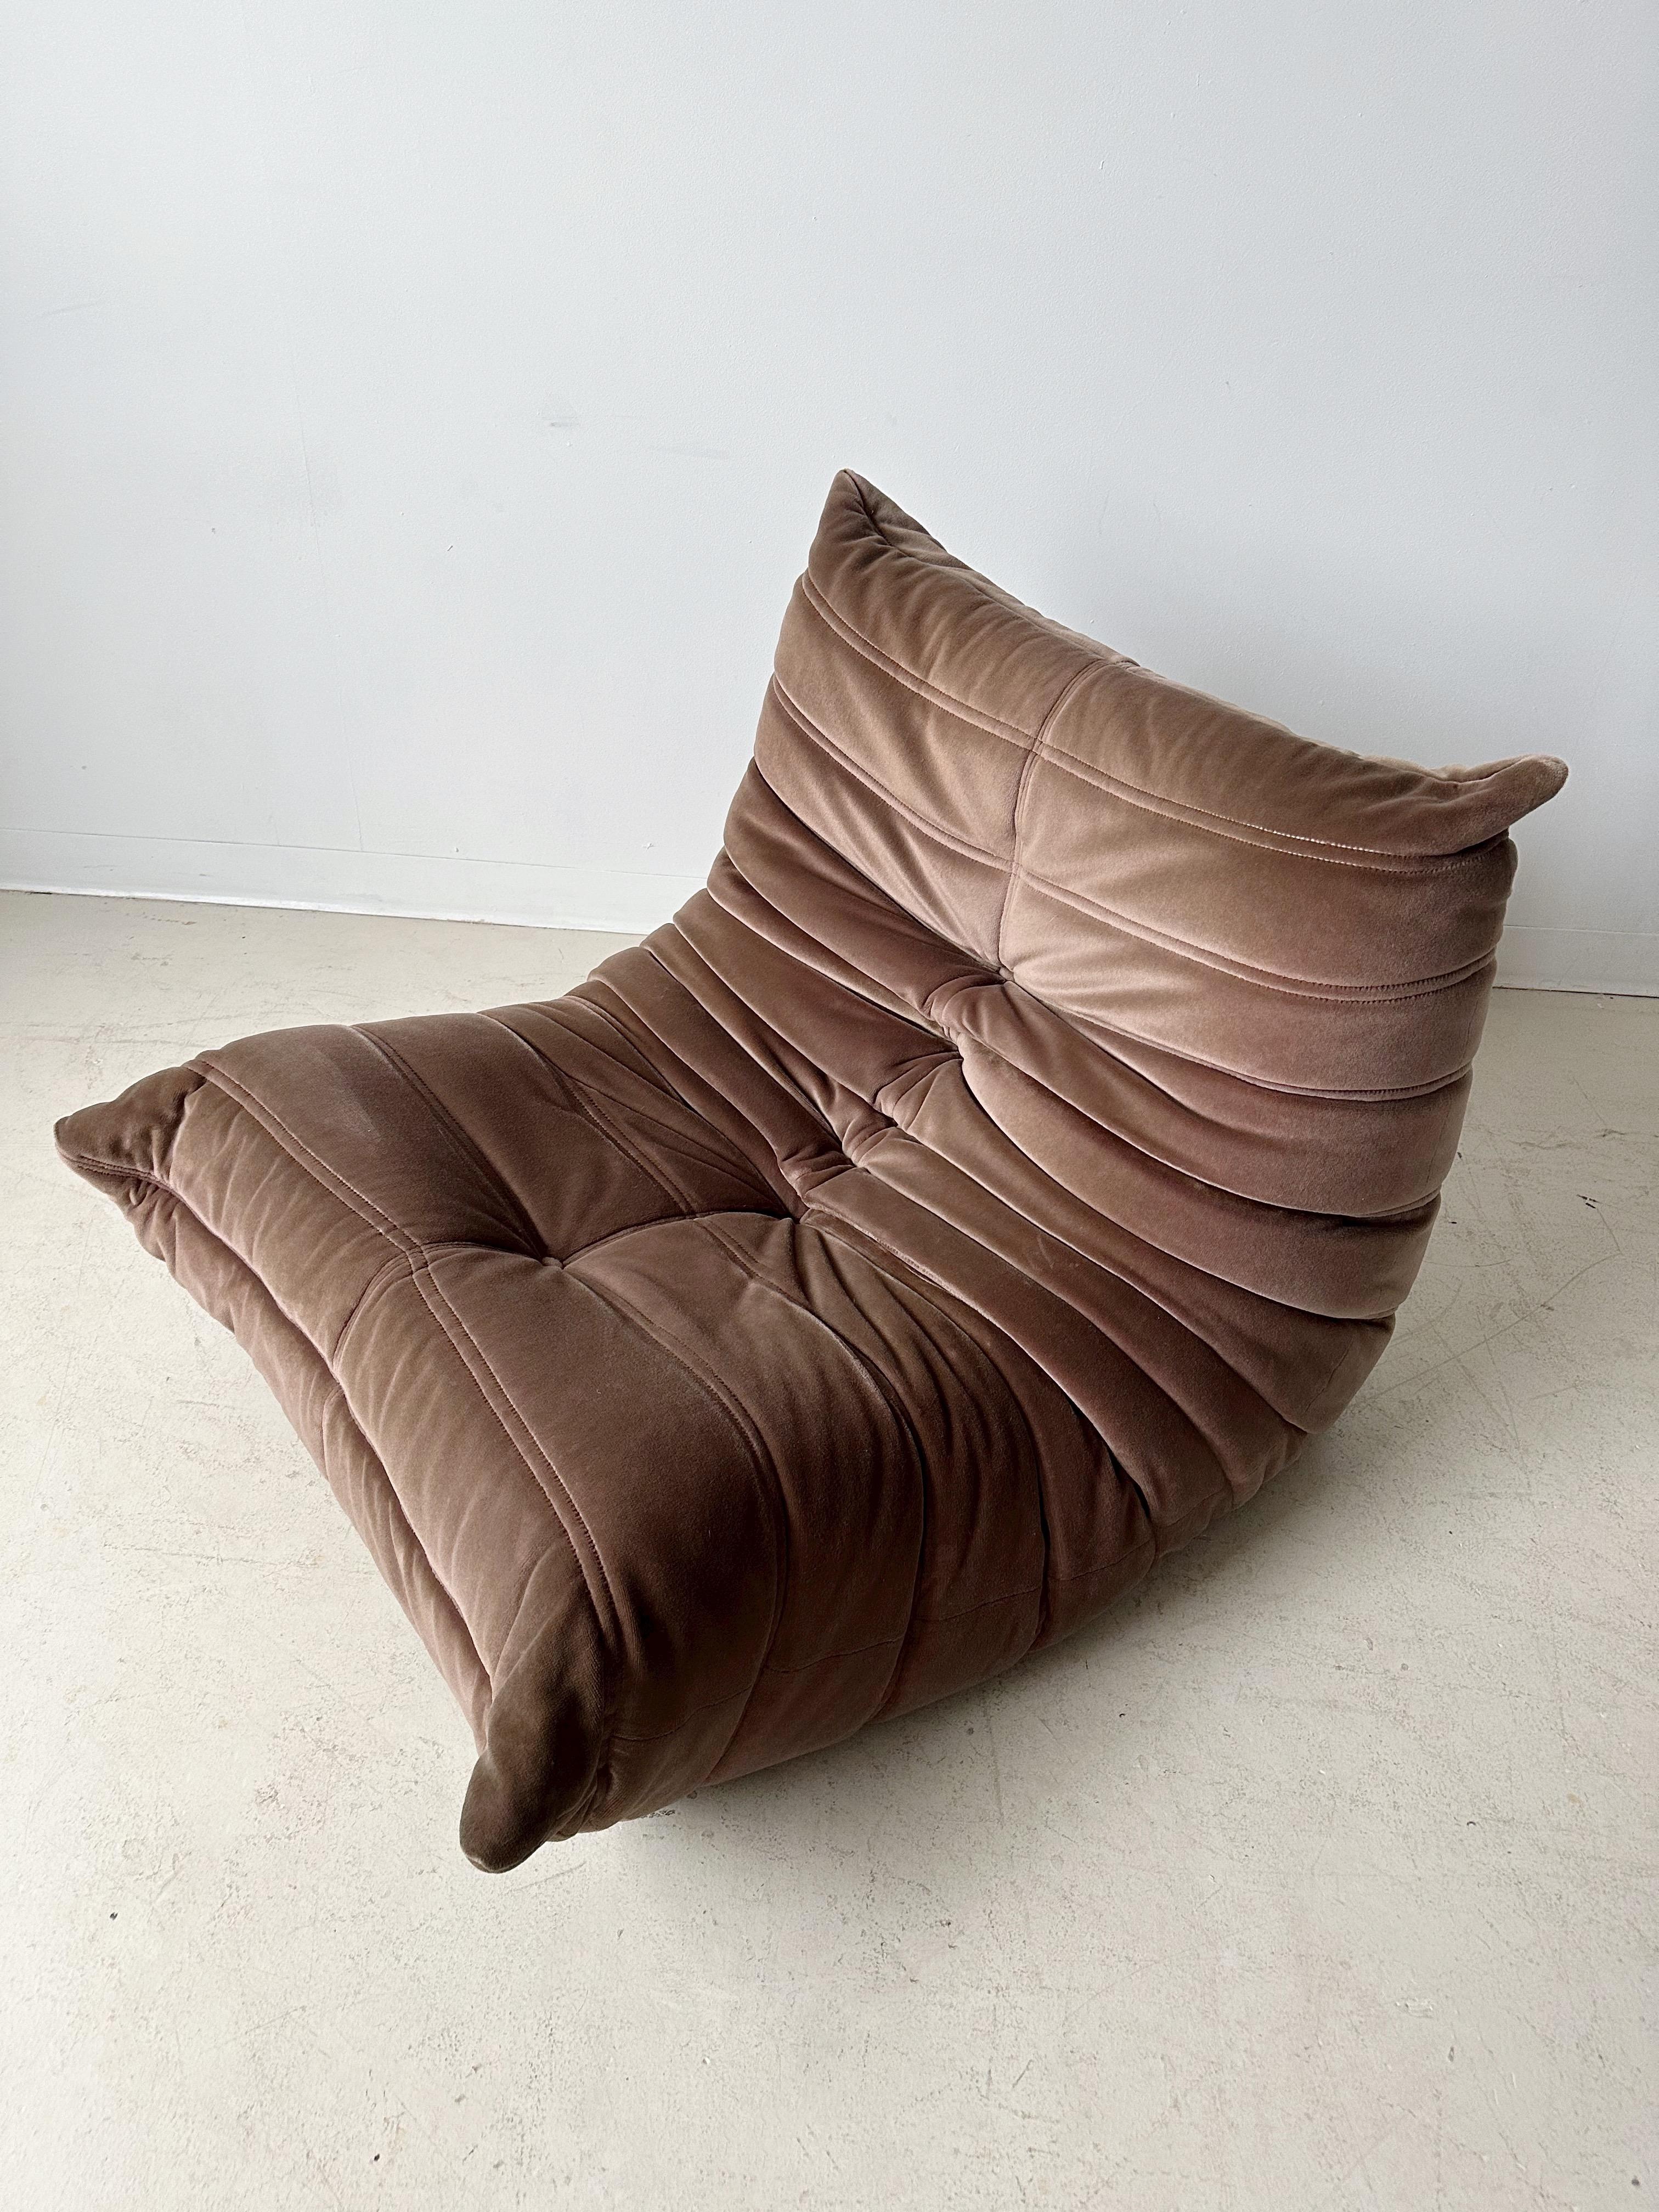 Vintage Brown Velvet Togo Lounge Chair by Michel Ducaroy for Ligne Roset, manufactured by Airborne/Arconas Canada, 80's

Arconas was the licensed North American manufacturer of Ligne Roset for a very brief period in the 80's. Original